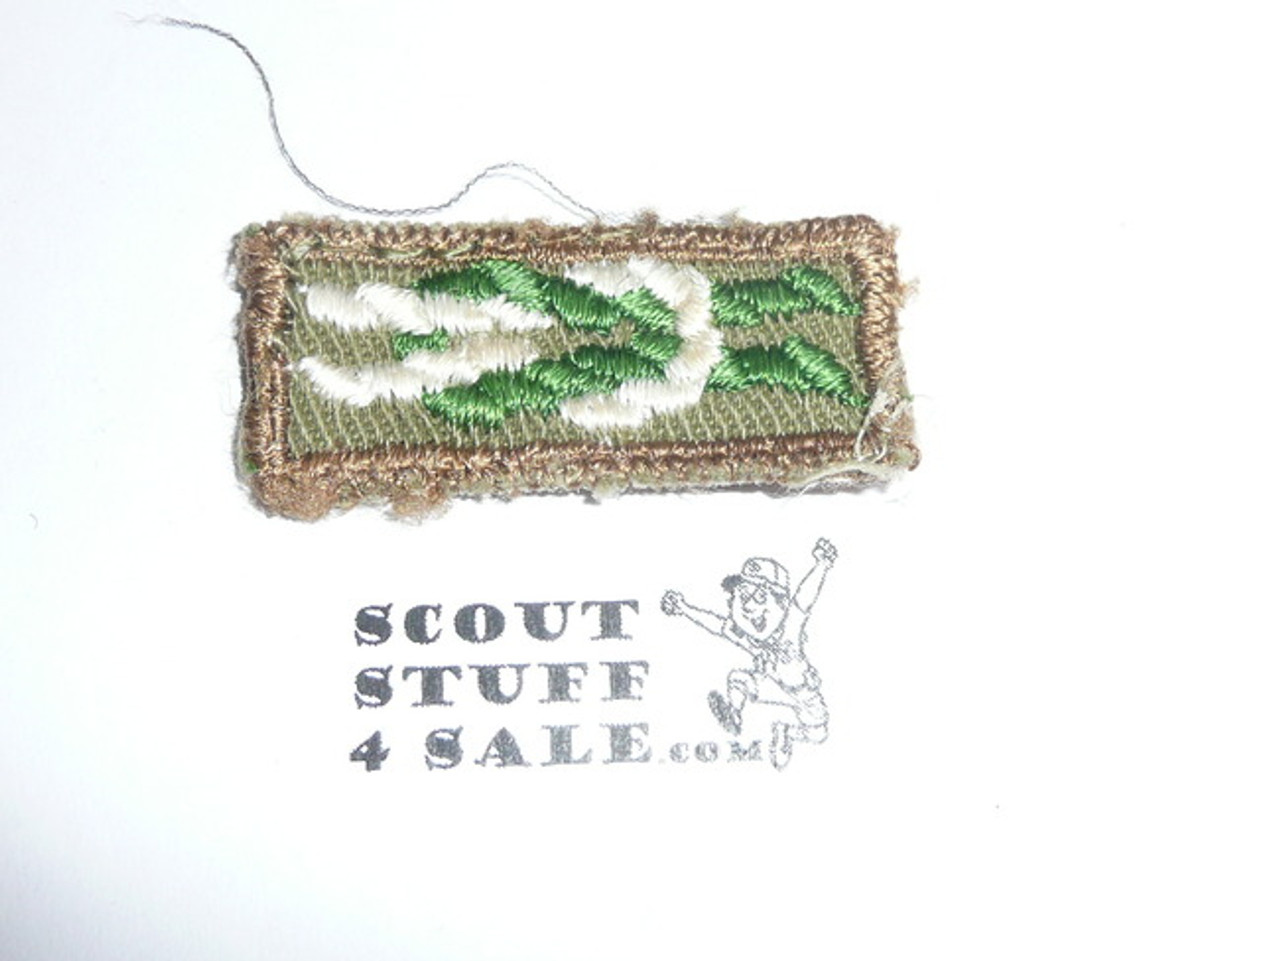 Scoutmaster's / Scouter's Key on Khaki, 1946-1983, used